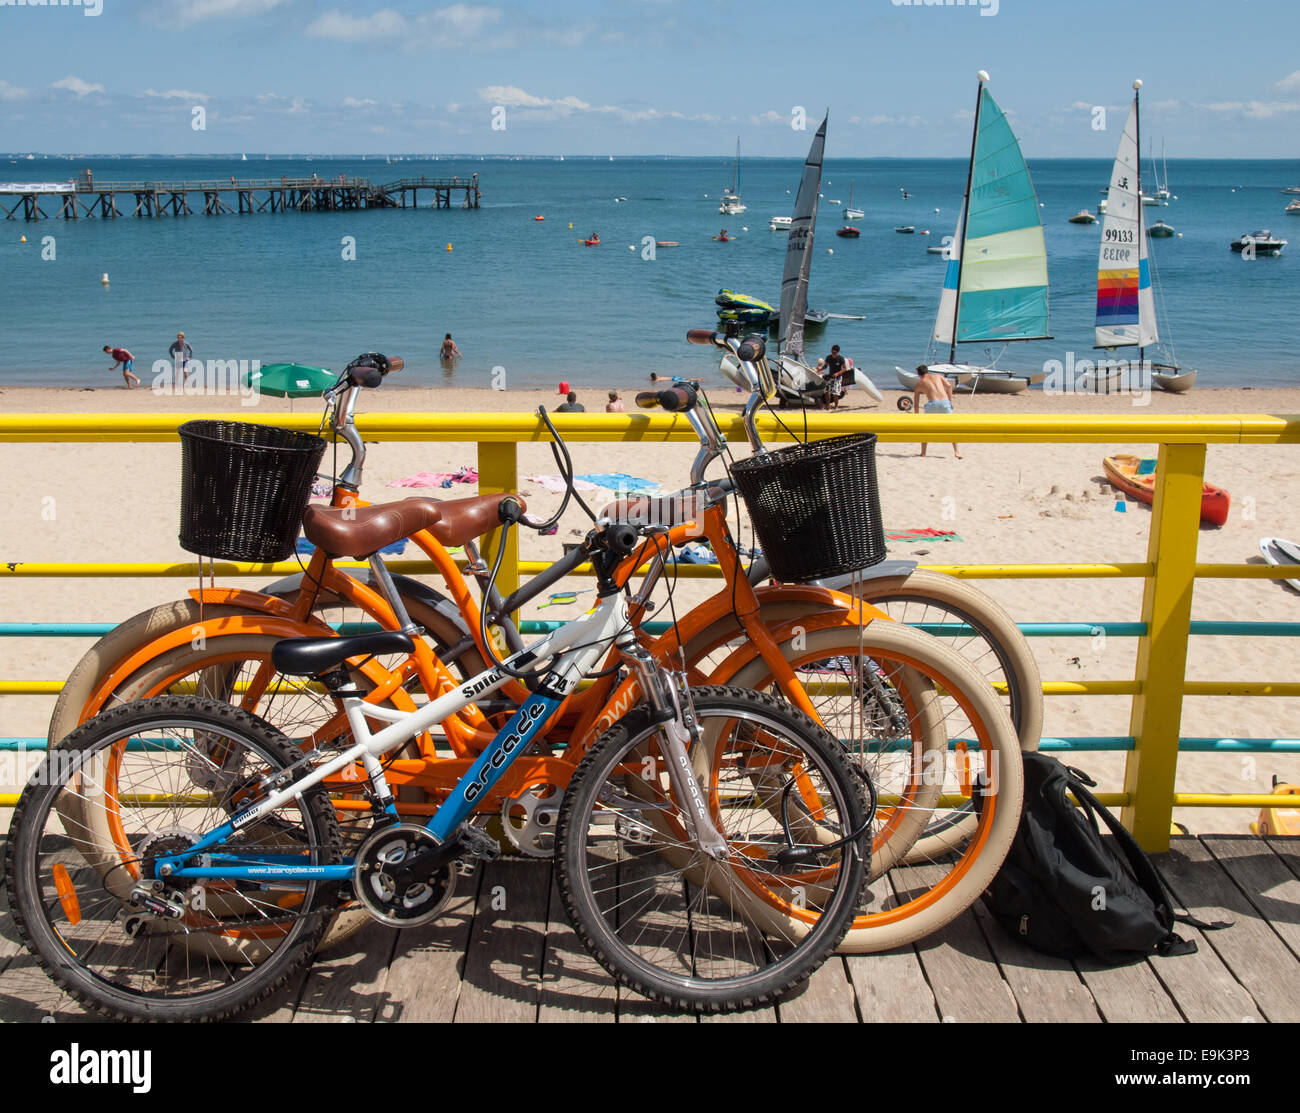 the plage des dames Noirmoutier-en-l'Île noirmoutier on a bright sunny summer day with bicycles in the foreground Stock Photo